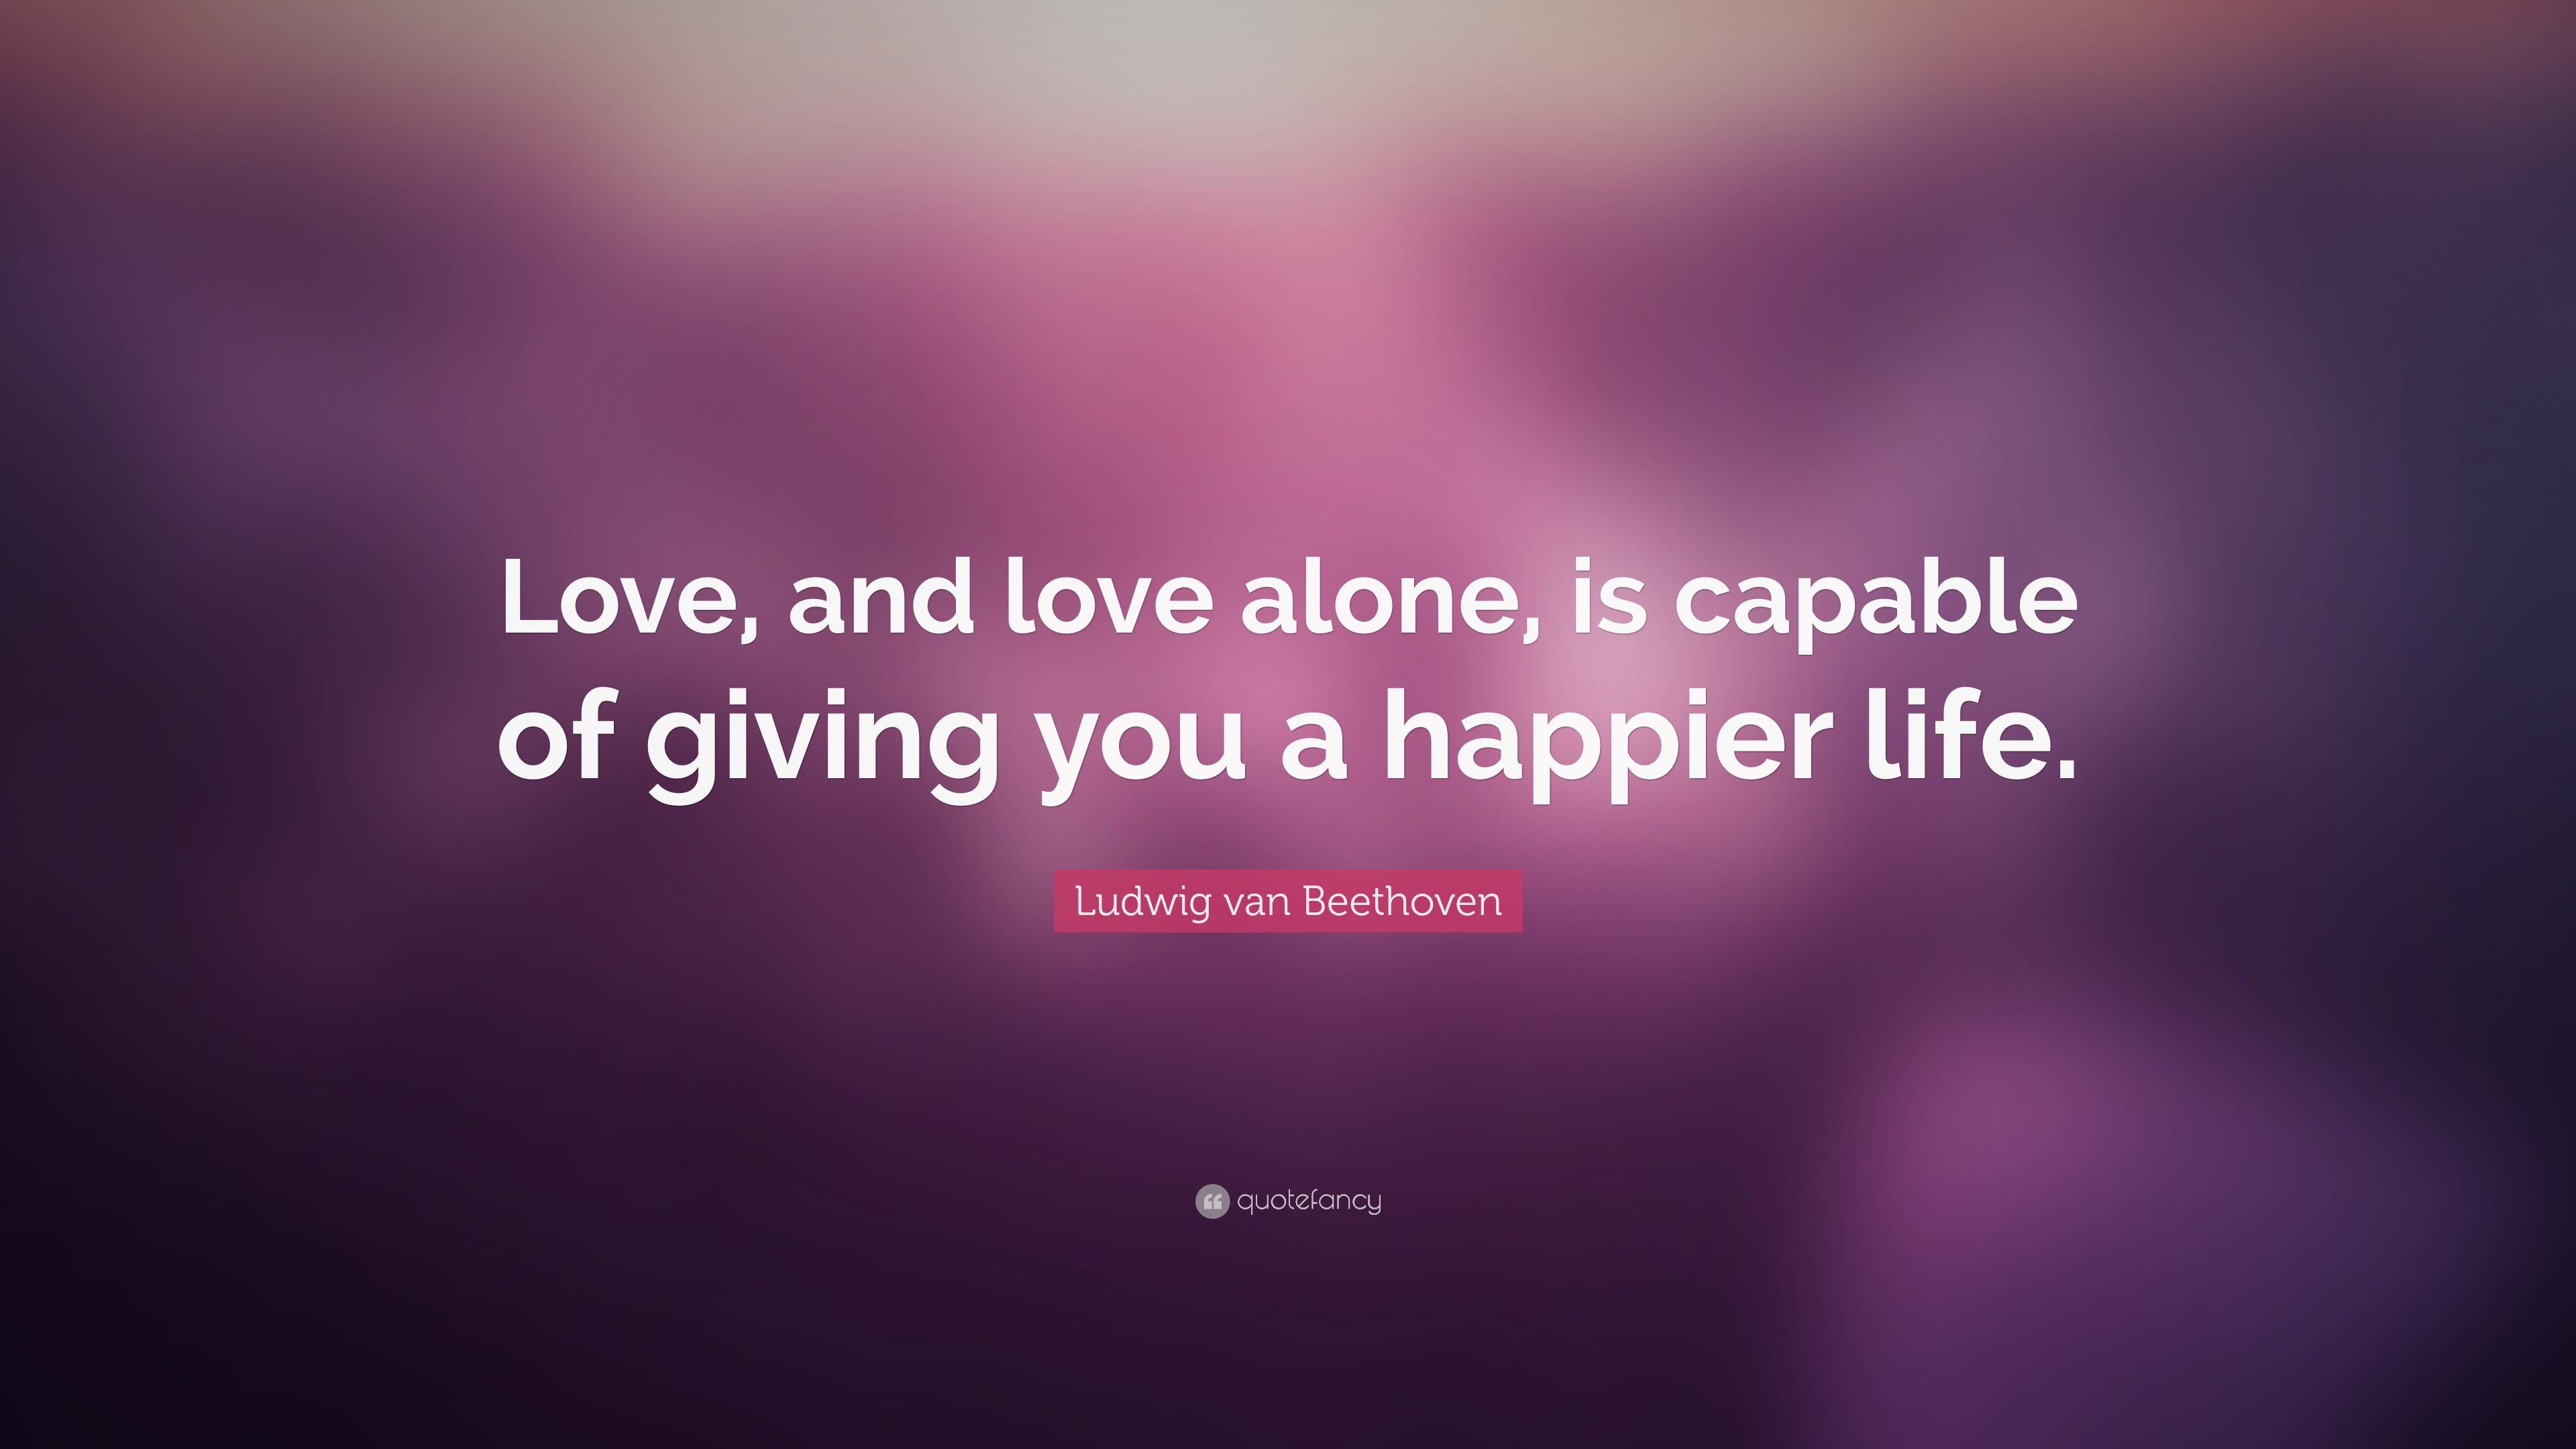 Ludwig van Beethoven Quote: “Love, and love alone, is capable